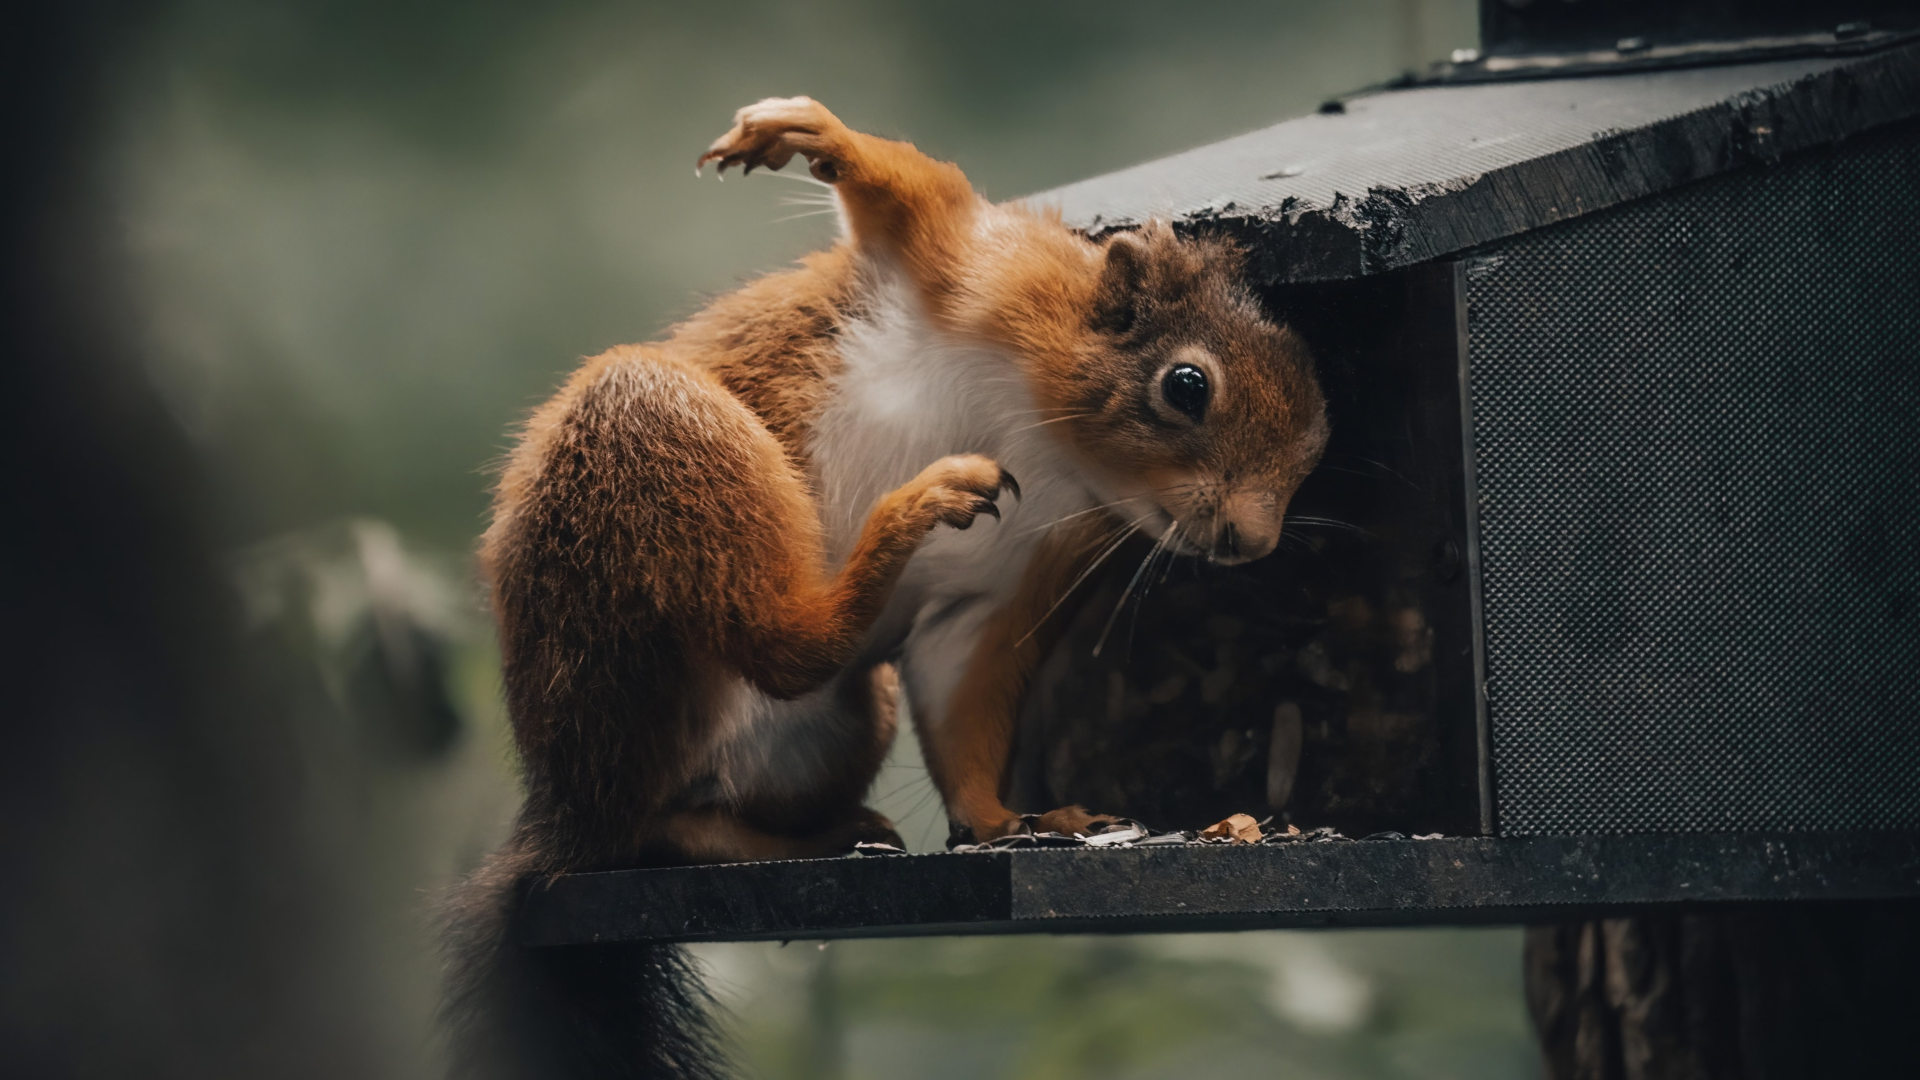 A squirrel chows down at a feeder in the U.K.